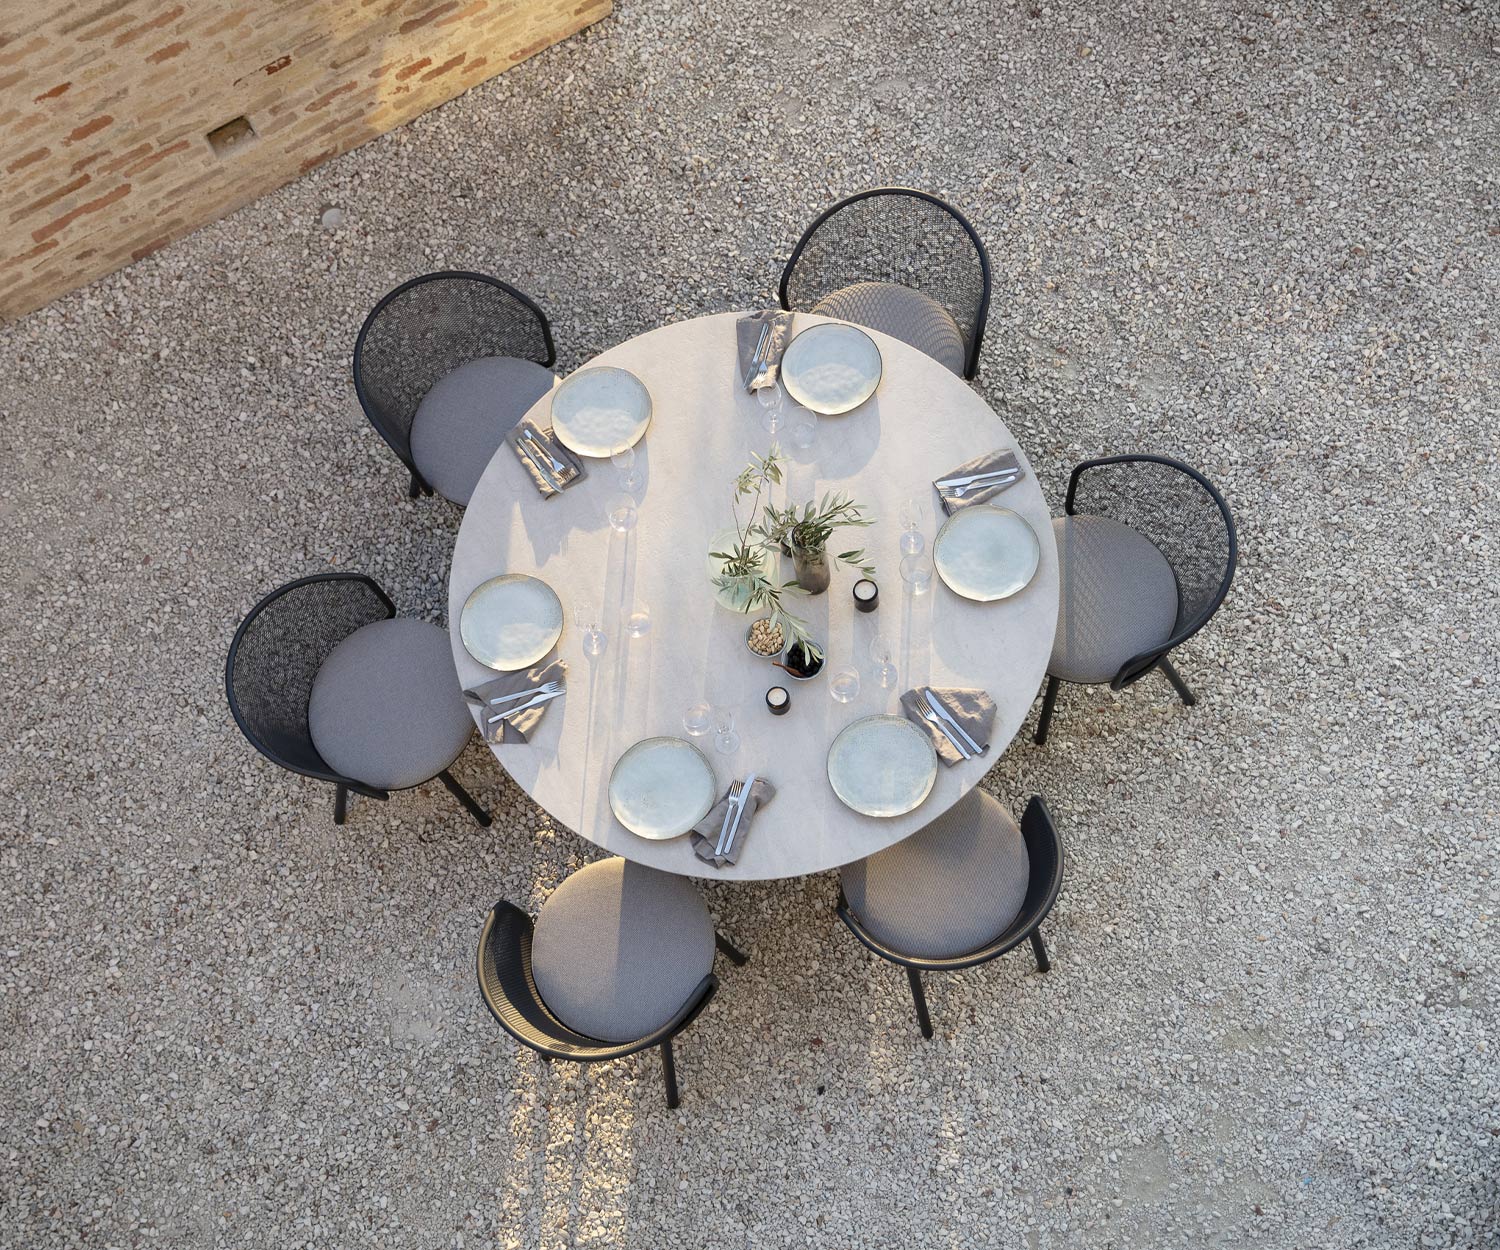 Exclusive Todus Branta Design round dining table by the swimming pool on the terrace